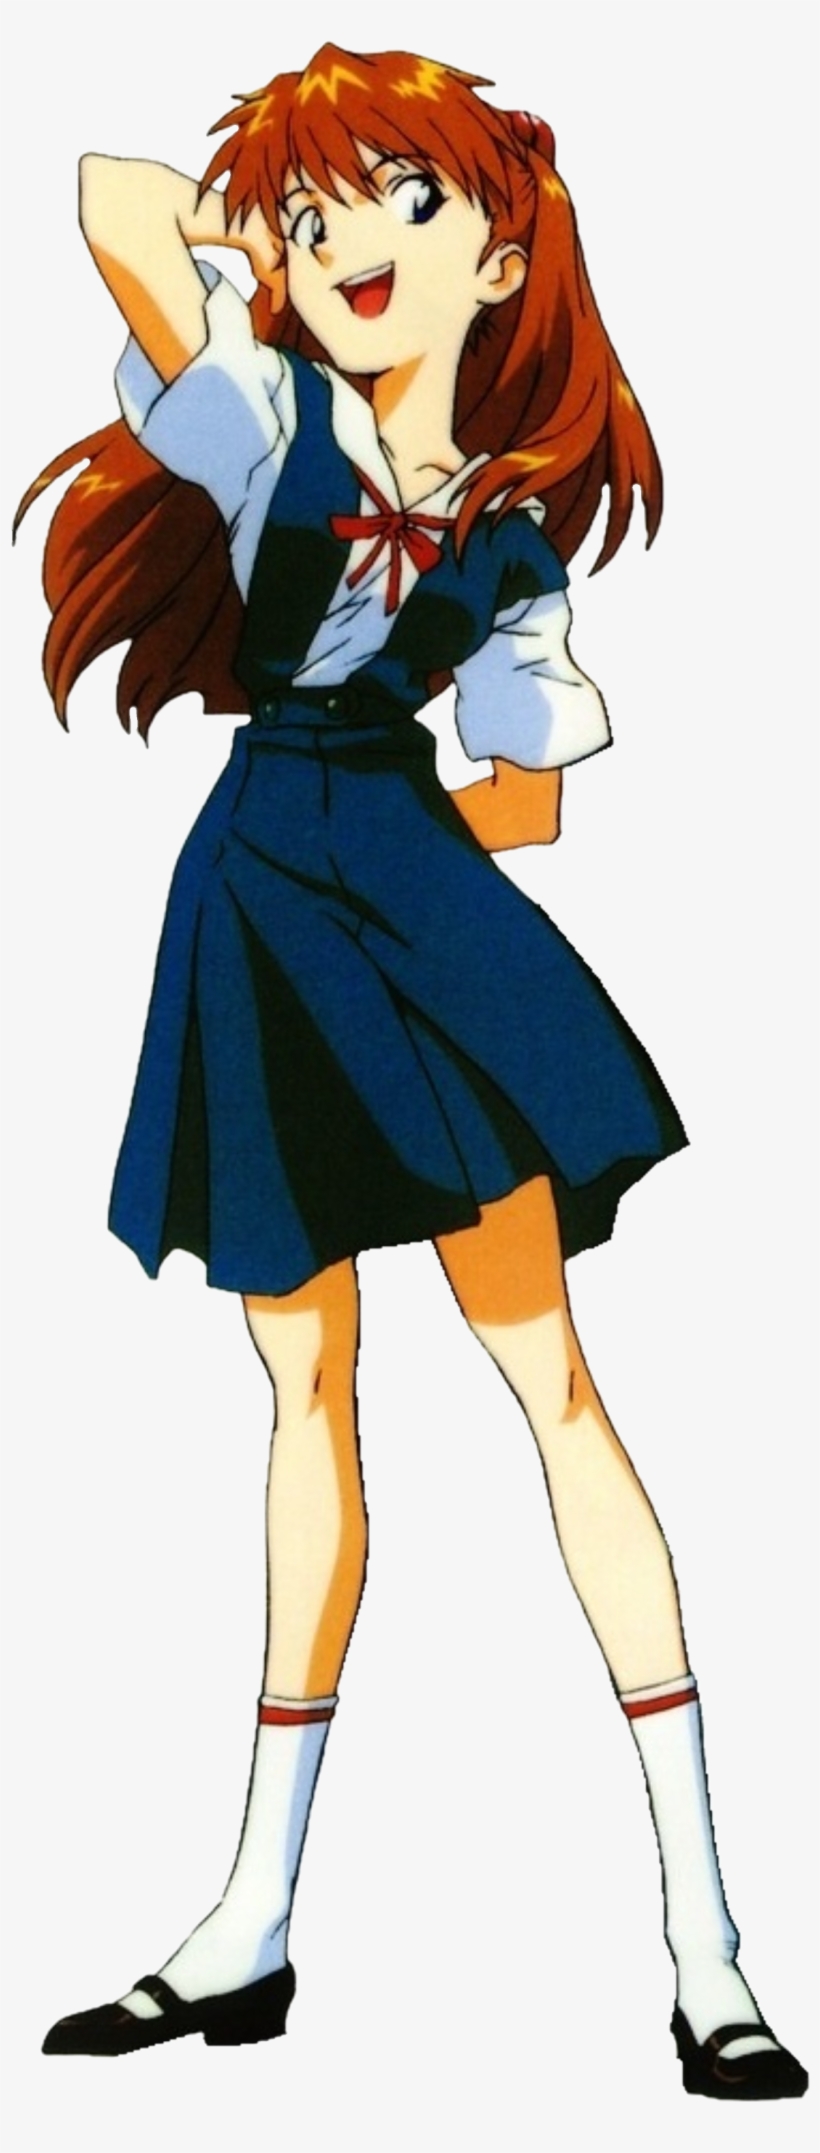 Asuka Langley Soryu In Her Iconic Outfit - Asuka Langley Soryu Png, transparent png #1345322